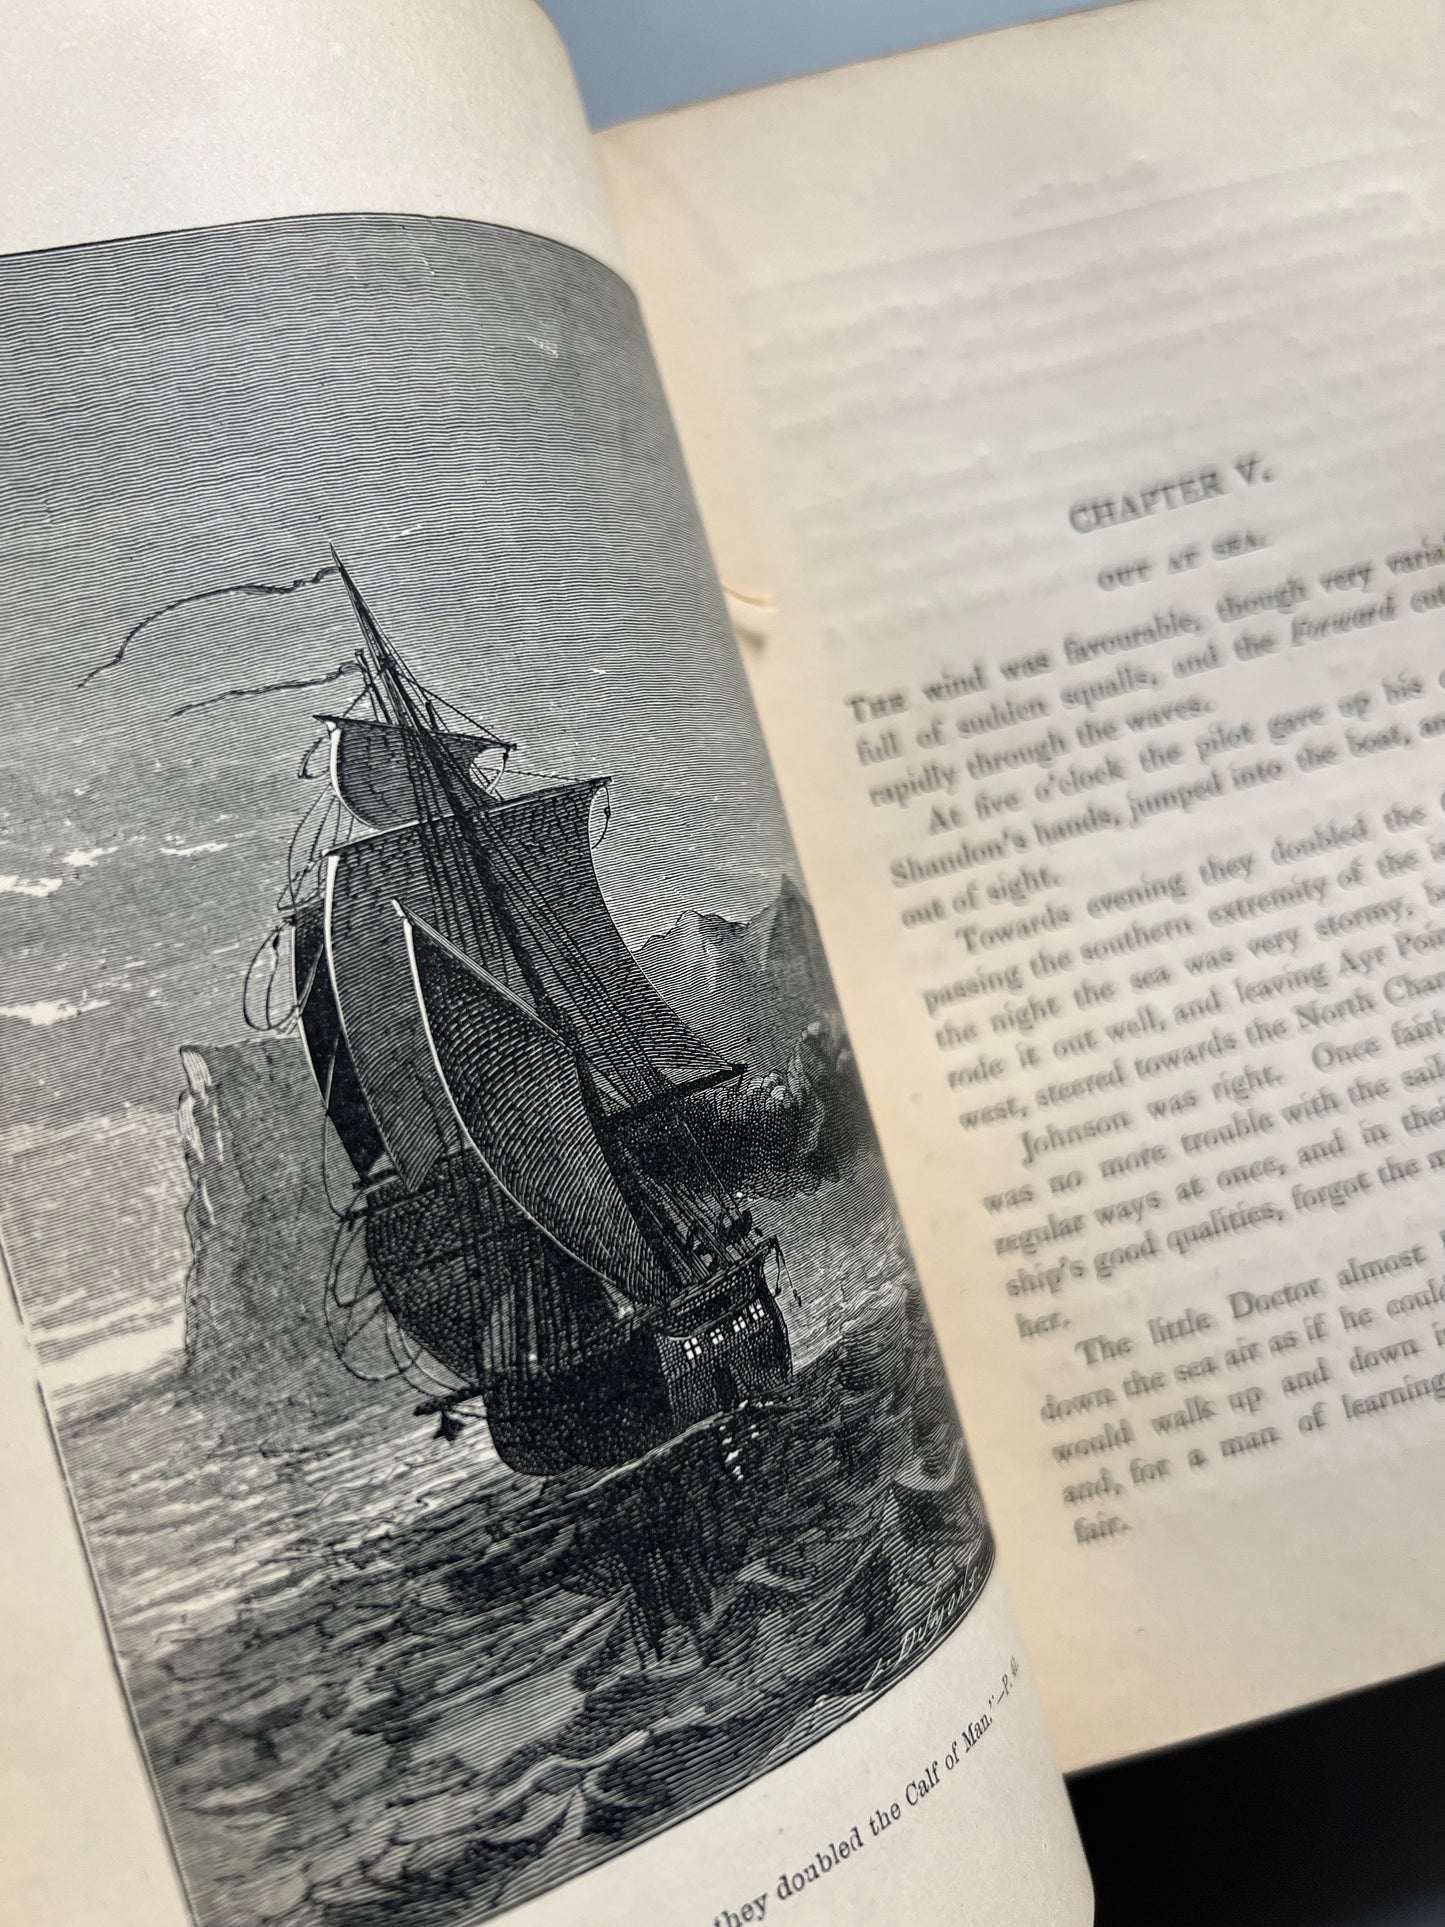 The adventures of Captain Hatteras, Julio Verne (first english edition in one volume) - George Routledge and sons, 1876